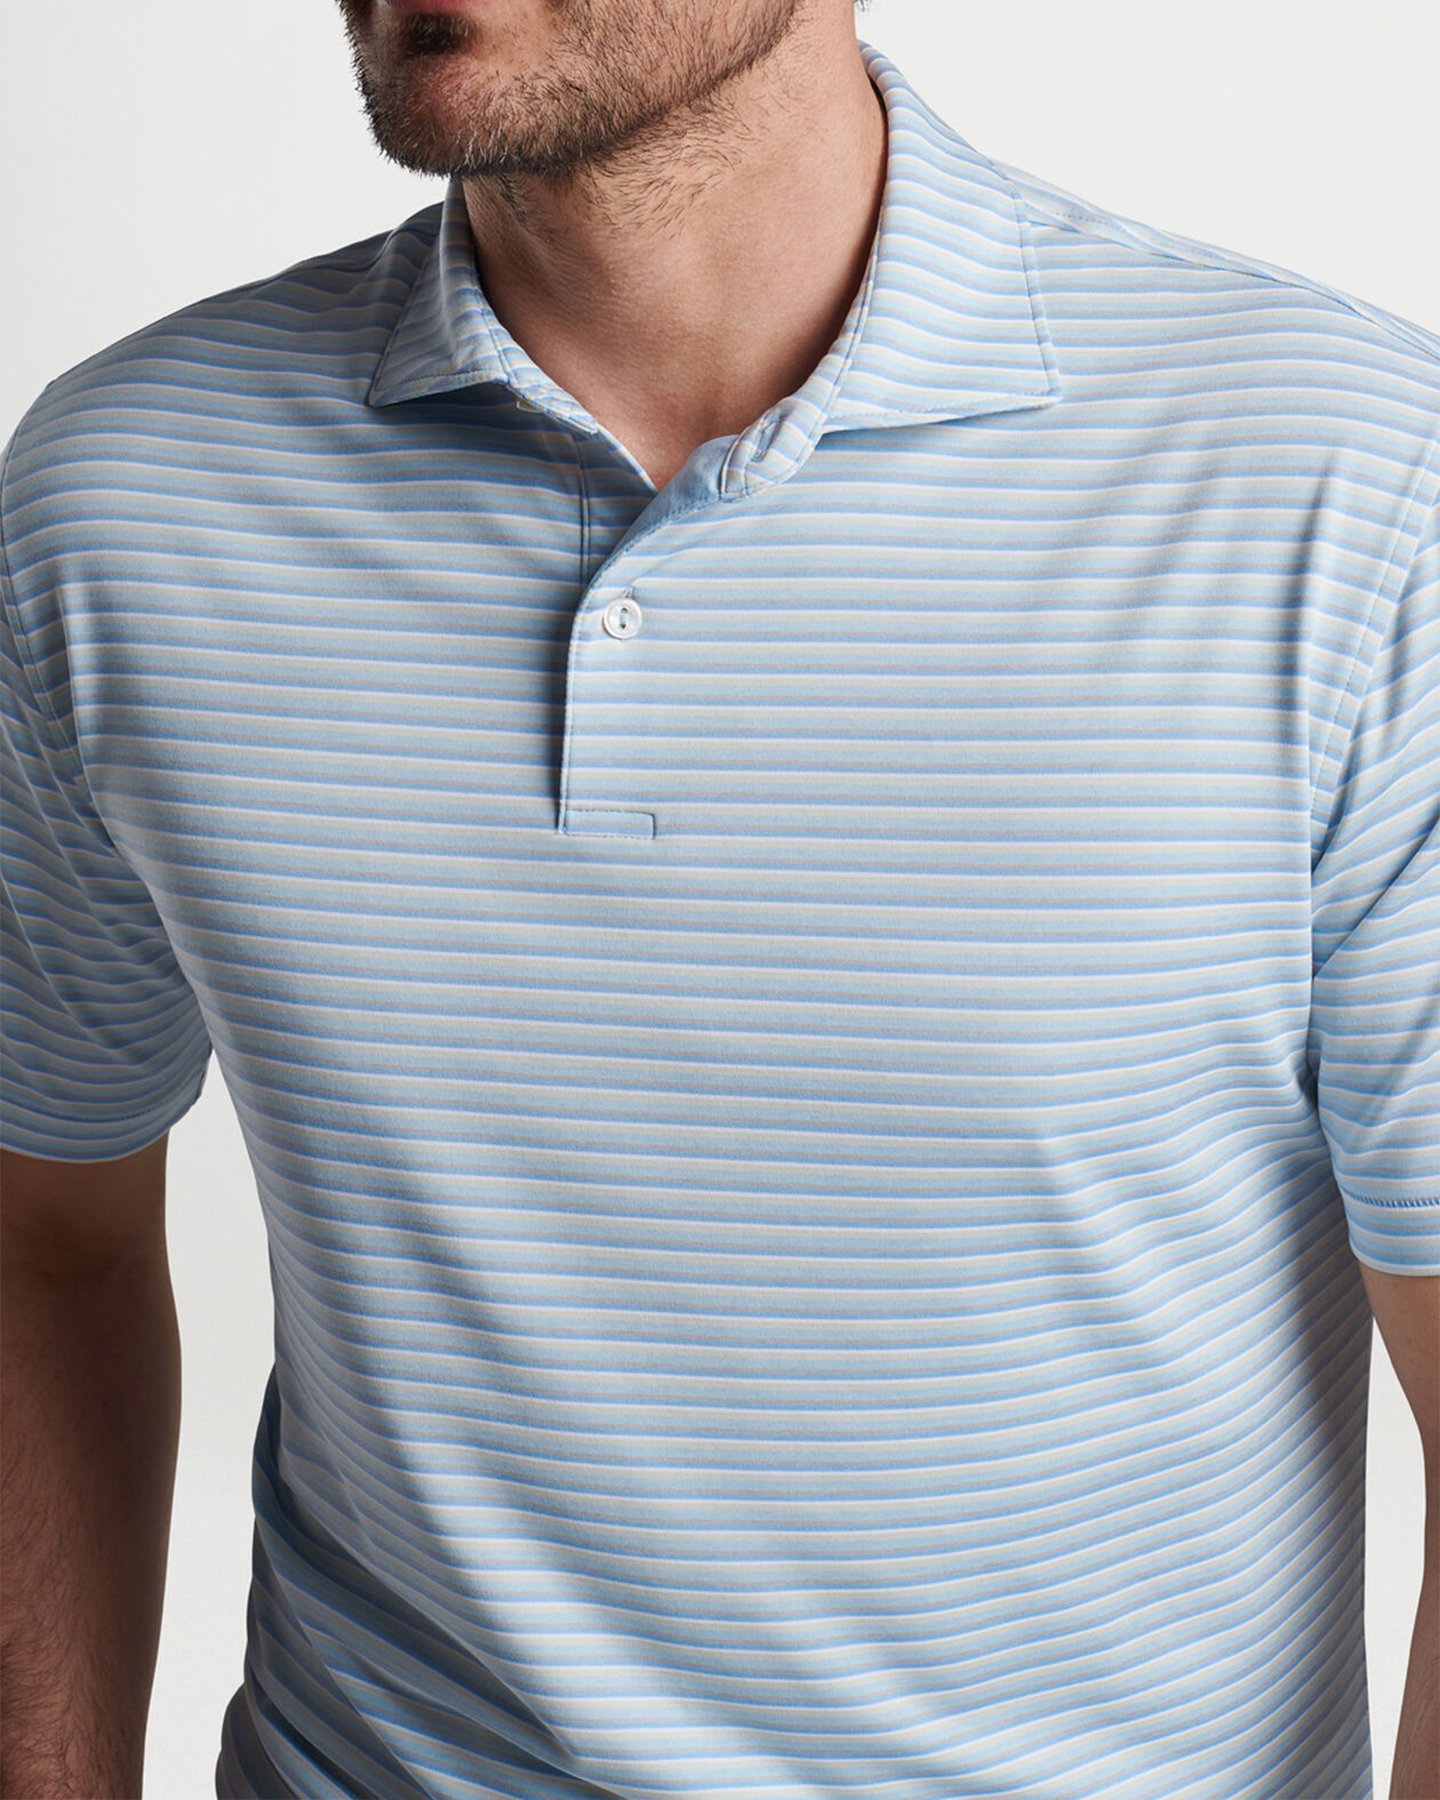 MCCRAVEN PERFORMANCE JERSEY POLO - BLUE FROST